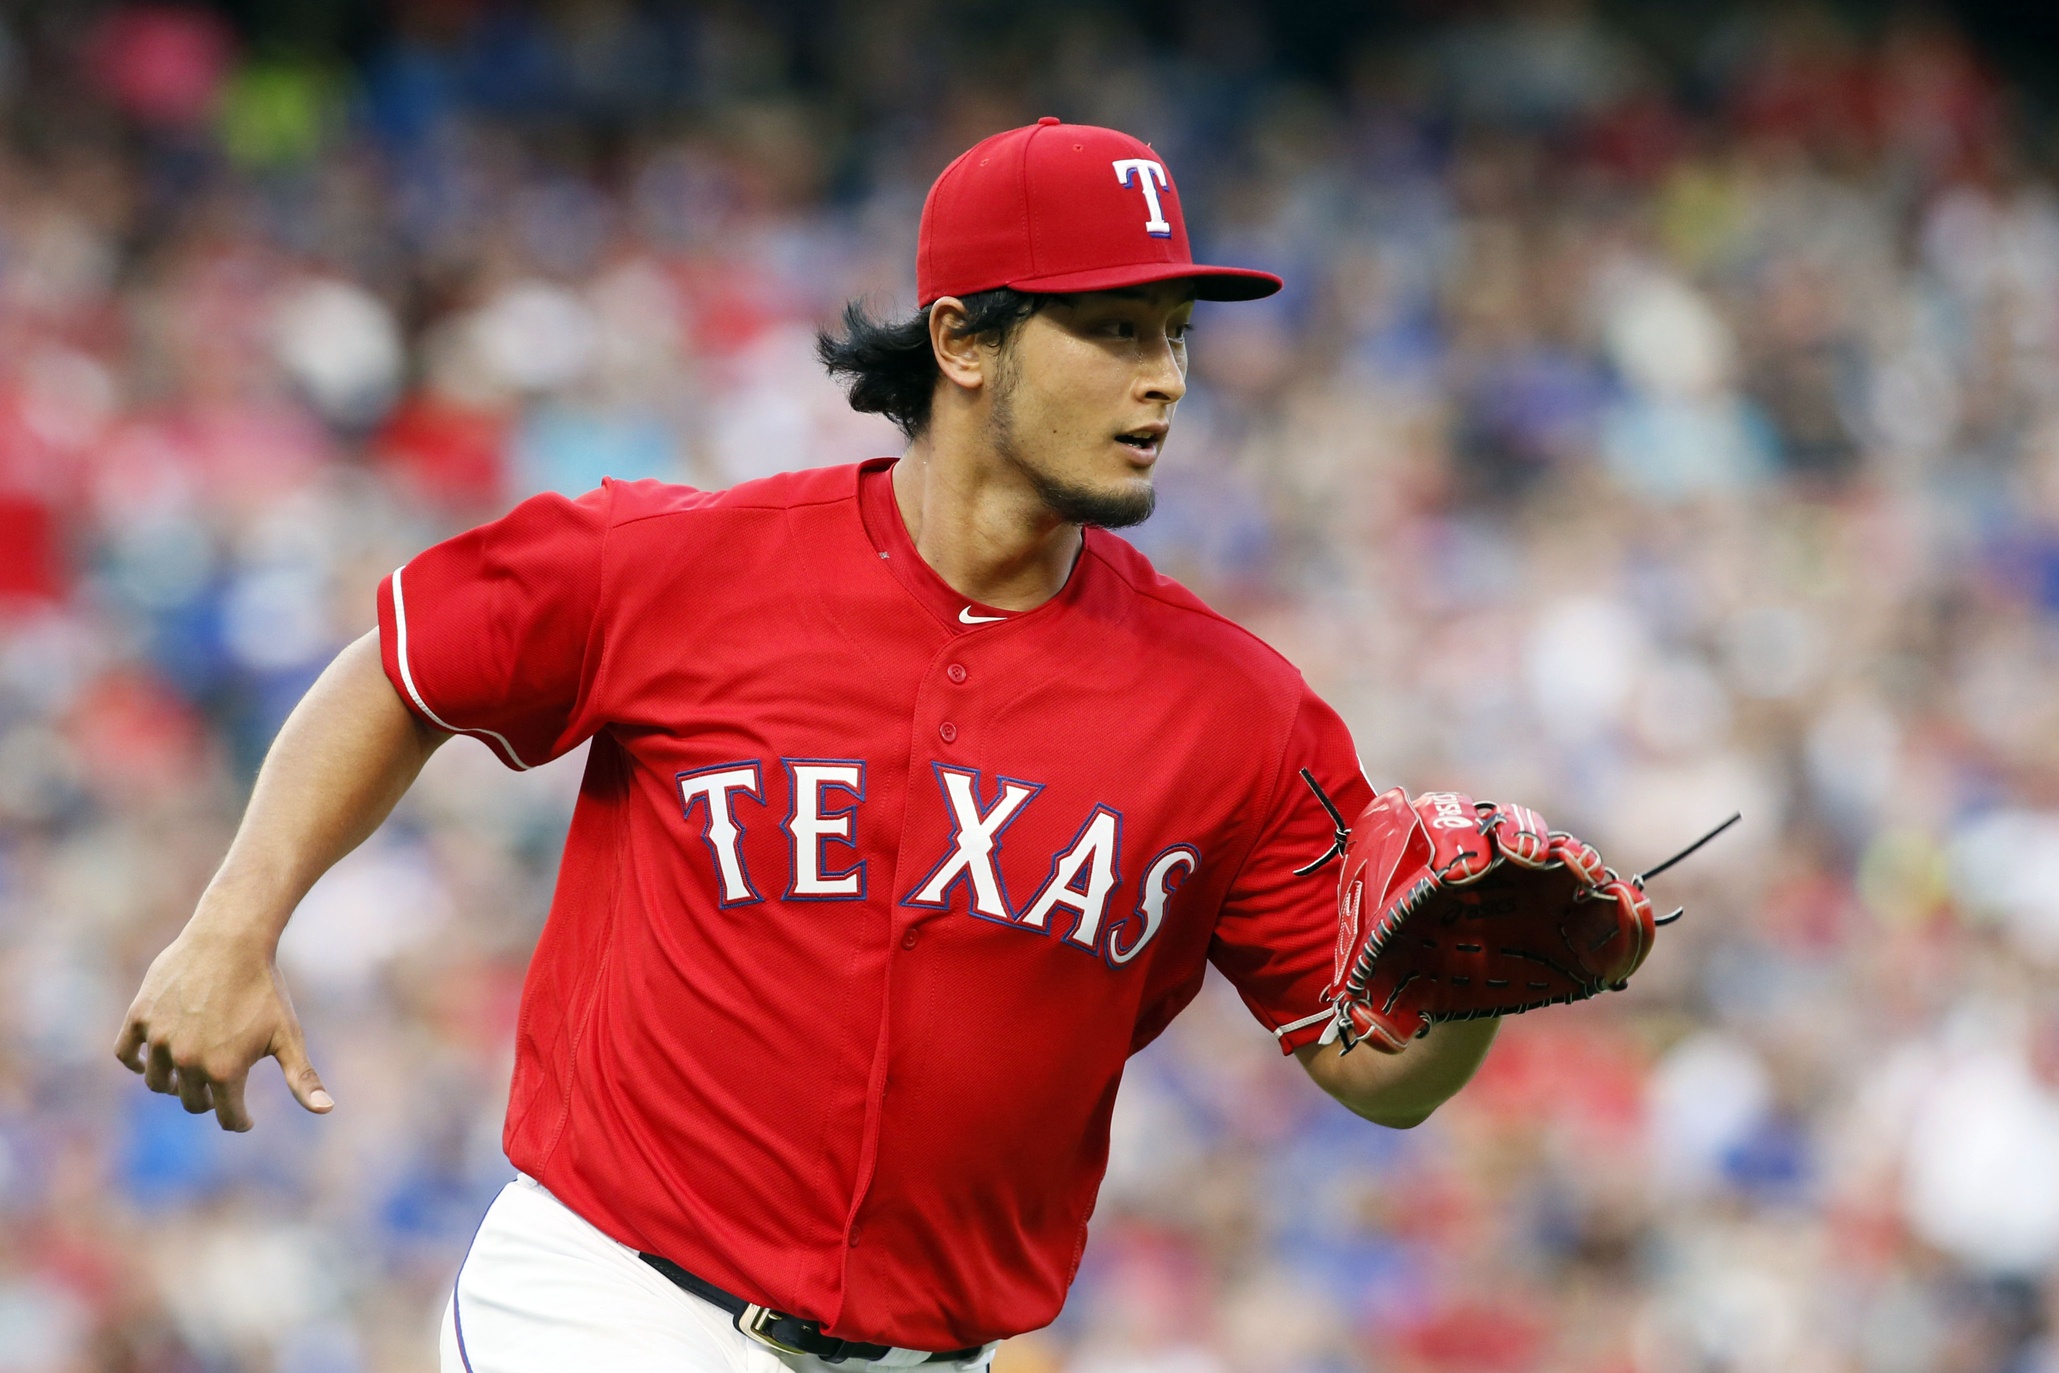 The impossible hope of a naïve dream: Darvish is back, Rangers win 5-2